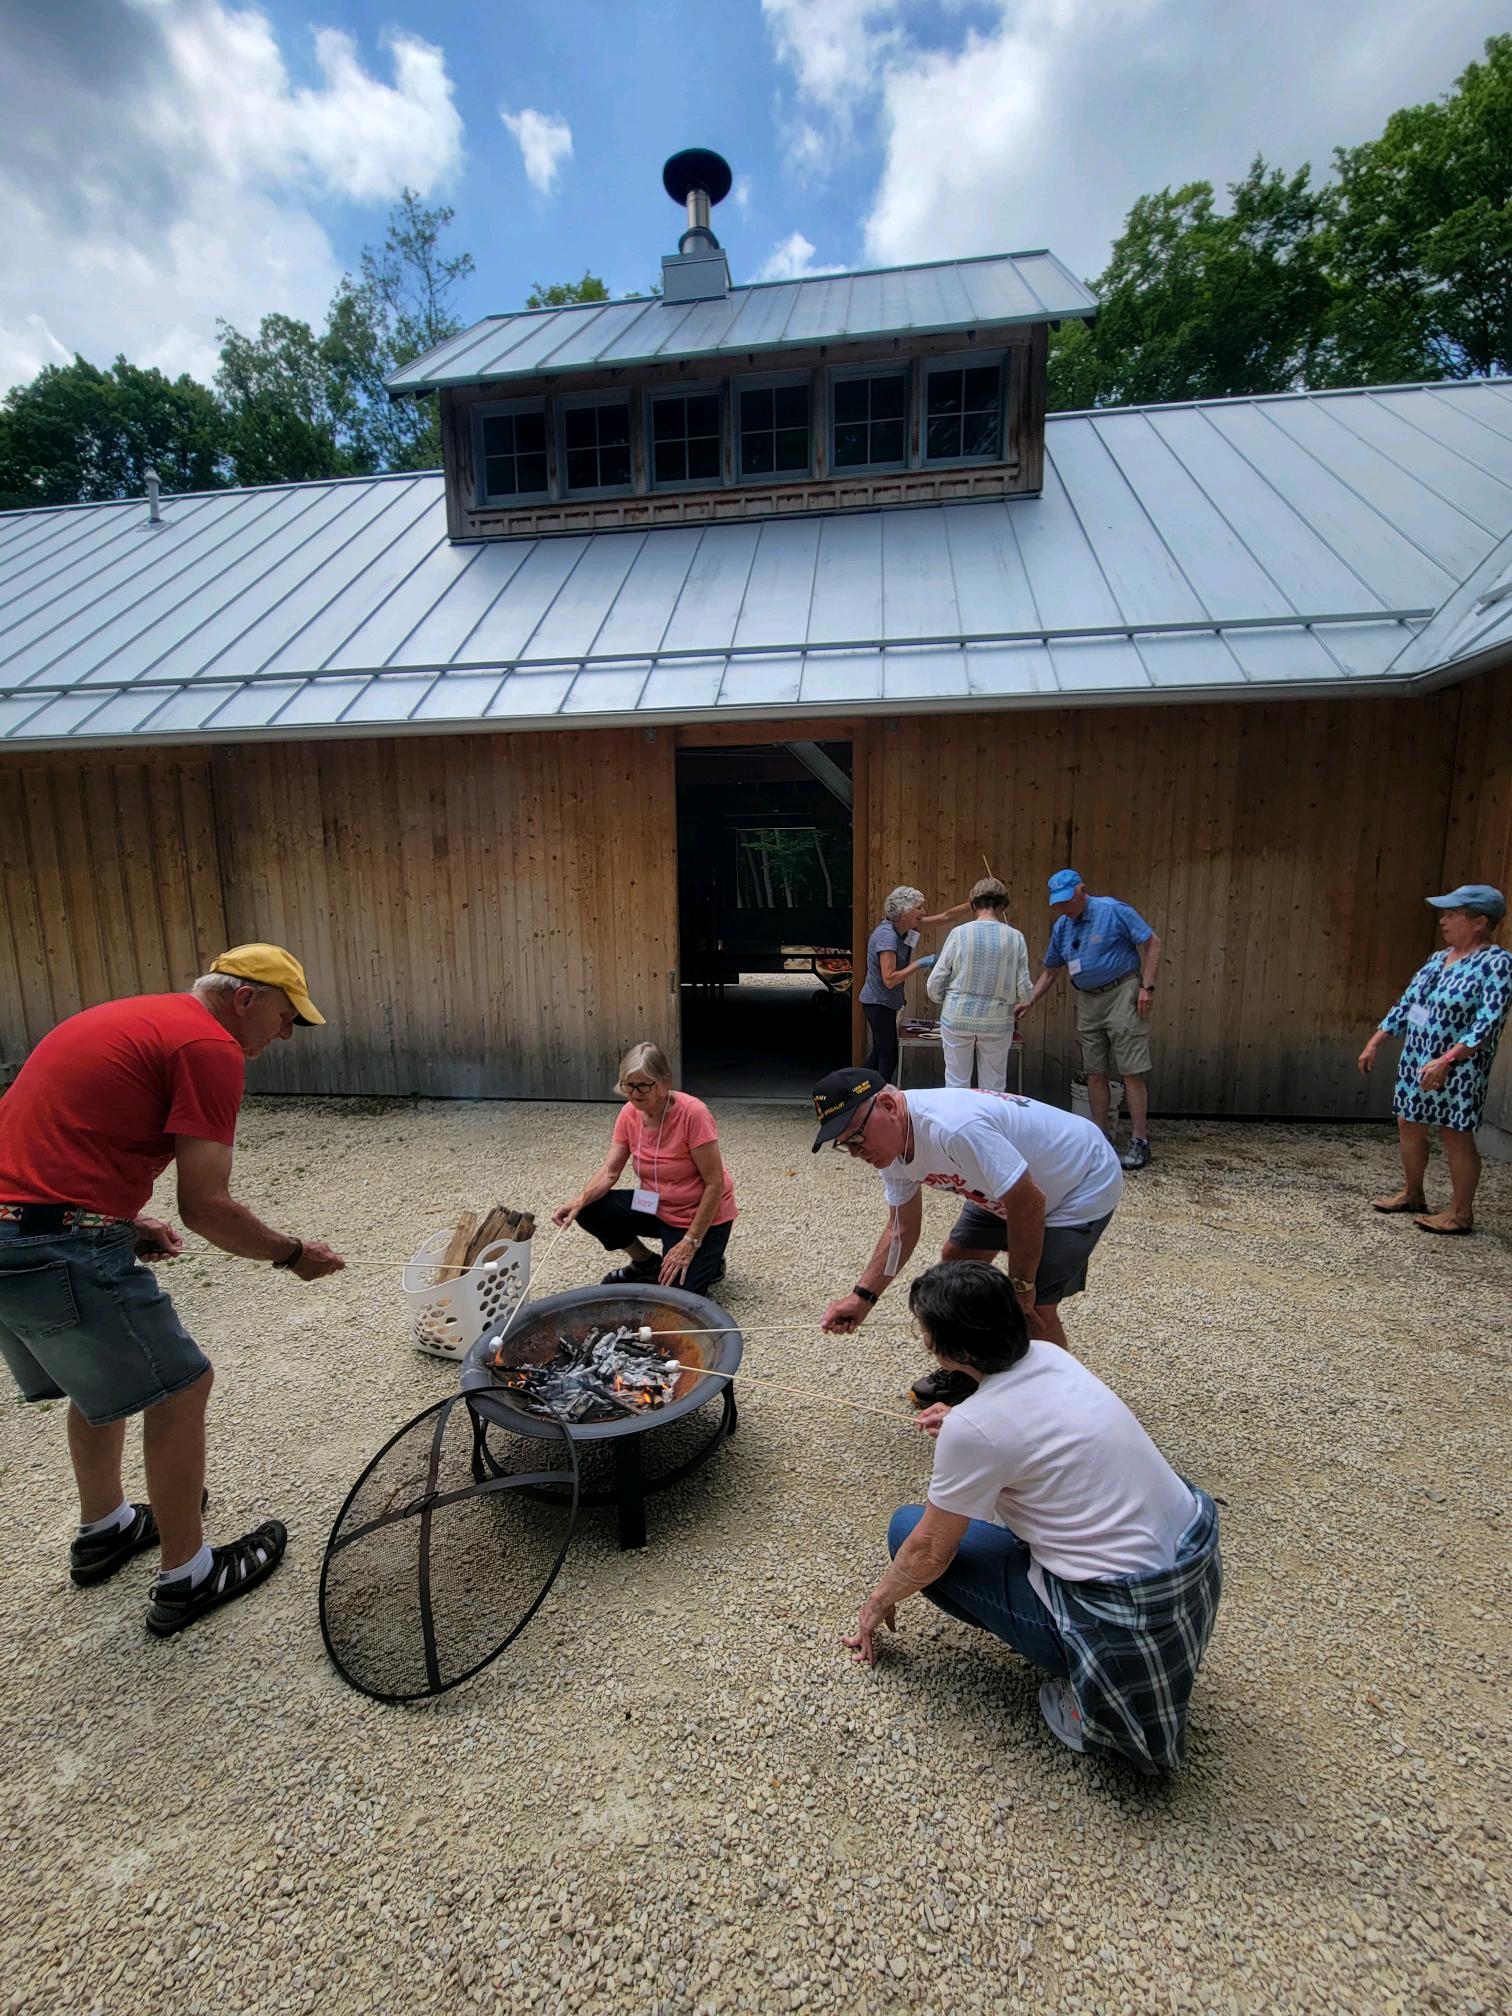 4 older adults kneel around a campfire by the Riverdge Sugarbush House roasting marshmallows on sticks